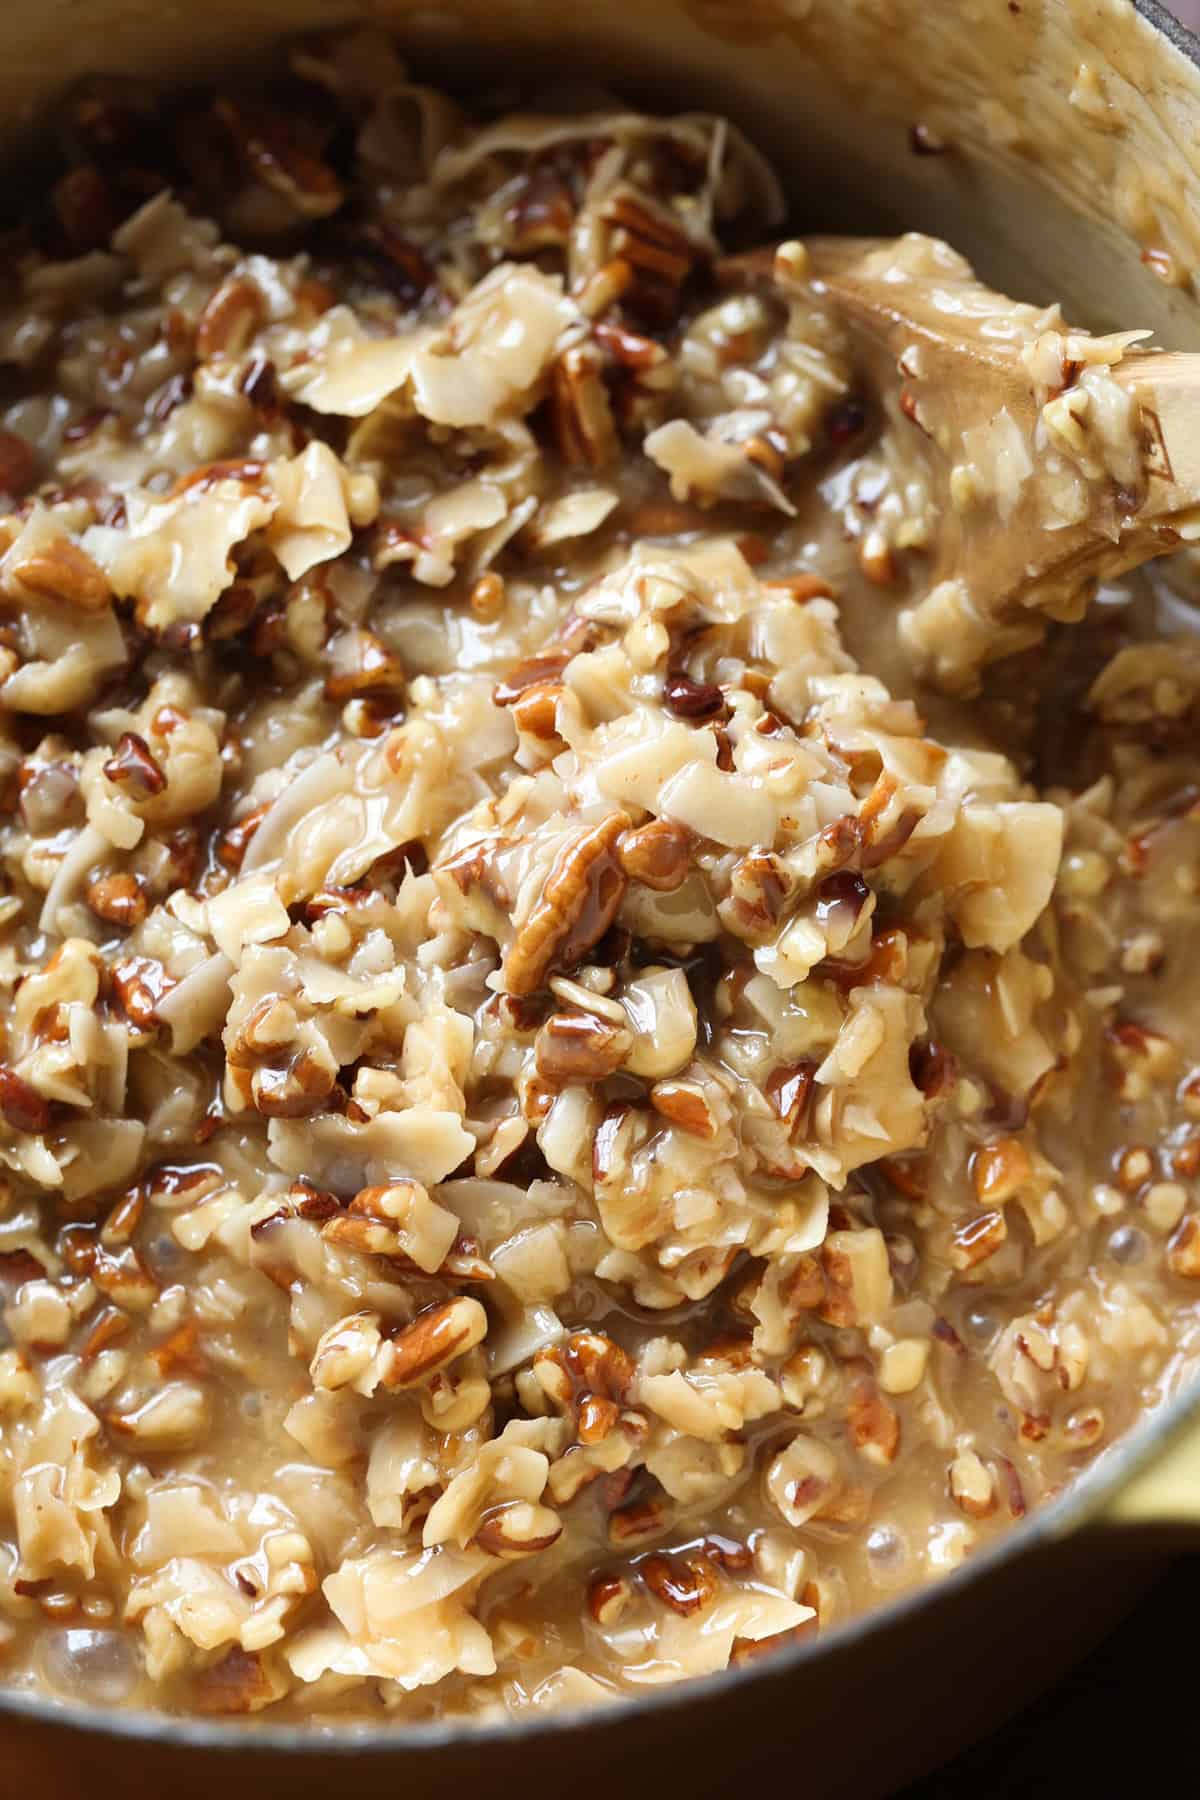 A mixture of coconut, pecans, and warm brown sugar candy mixture in a bowl stirred together.